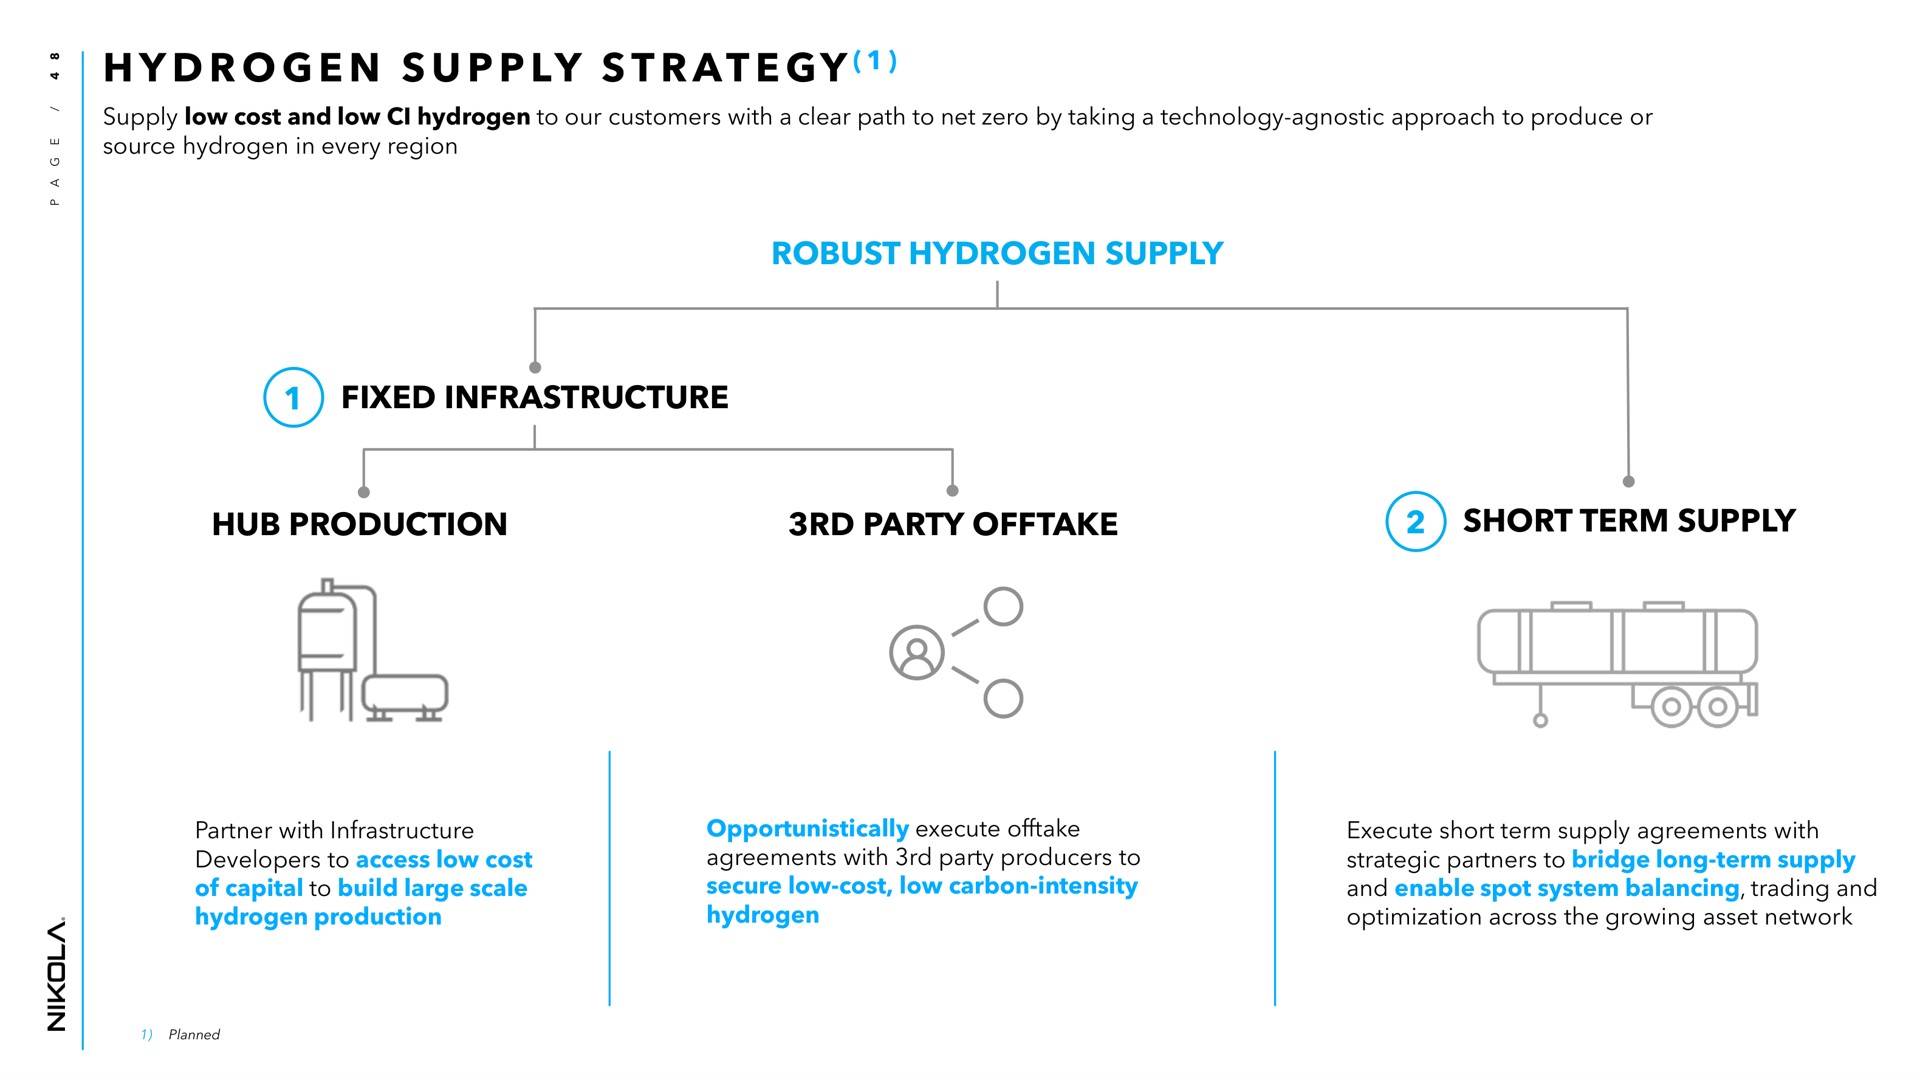 at robust hydrogen supply fixed infrastructure hub production party offtake short term supply strategy of | Nikola